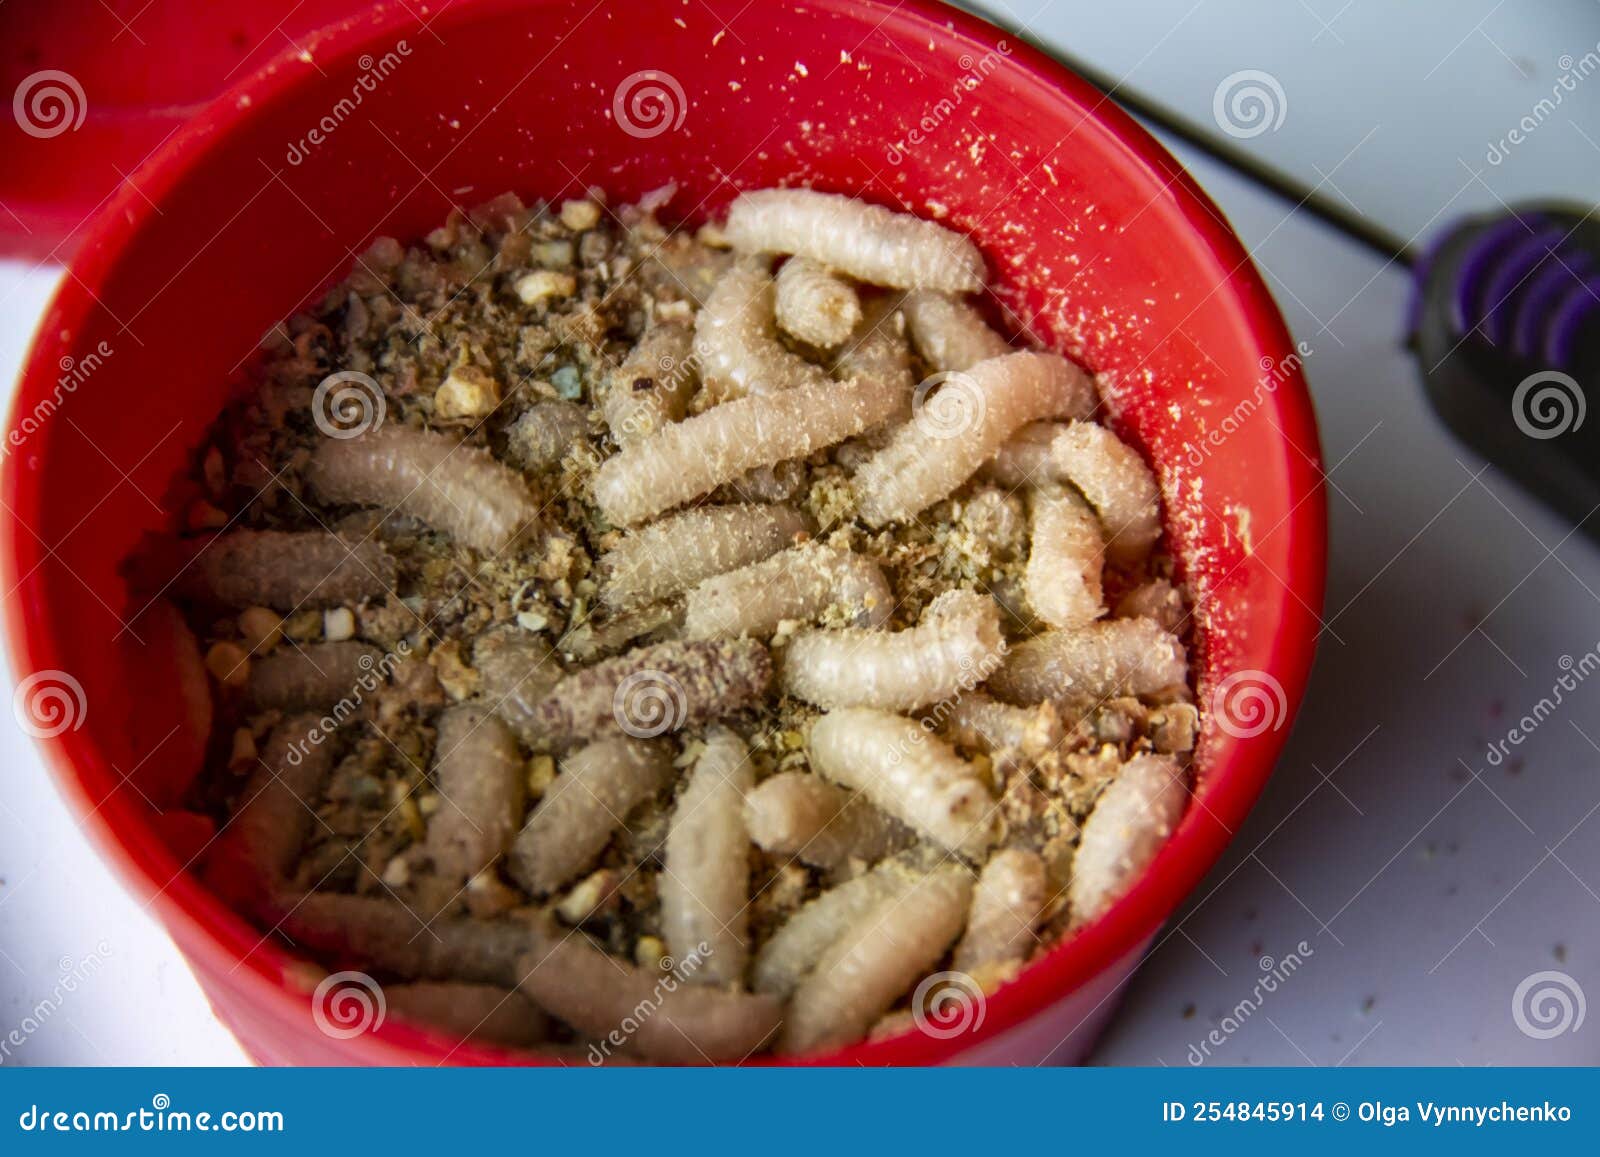 https://thumbs.dreamstime.com/z/live-fly-larvae-red-plastic-plate-as-bait-catching-fish-maggots-fishing-against-background-254845914.jpg